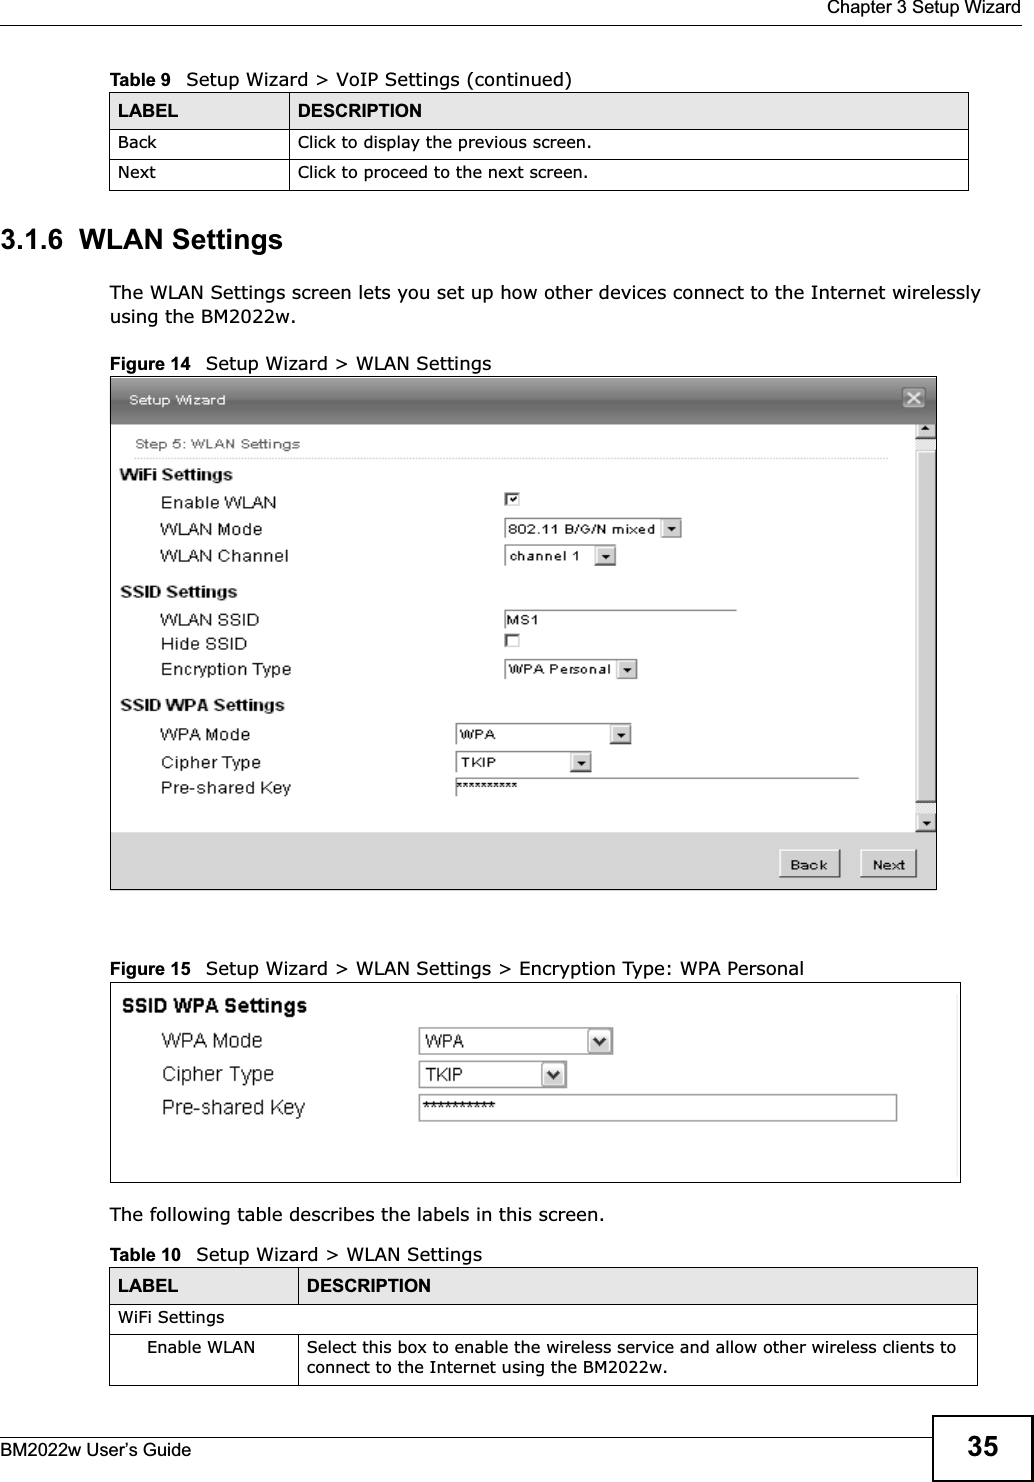  Chapter 3 Setup WizardBM2022w User’s Guide 353.1.6  WLAN SettingsThe WLAN Settings screen lets you set up how other devices connect to the Internet wirelessly using the BM2022w.Figure 14   Setup Wizard &gt; WLAN SettingsFigure 15   Setup Wizard &gt; WLAN Settings &gt; Encryption Type: WPA PersonalThe following table describes the labels in this screen.Back Click to display the previous screen.Next Click to proceed to the next screen. Table 9   Setup Wizard &gt; VoIP Settings (continued)LABEL DESCRIPTIONTable 10   Setup Wizard &gt; WLAN SettingsLABEL DESCRIPTIONWiFi SettingsEnable WLAN  Select this box to enable the wireless service and allow other wireless clients to connect to the Internet using the BM2022w.